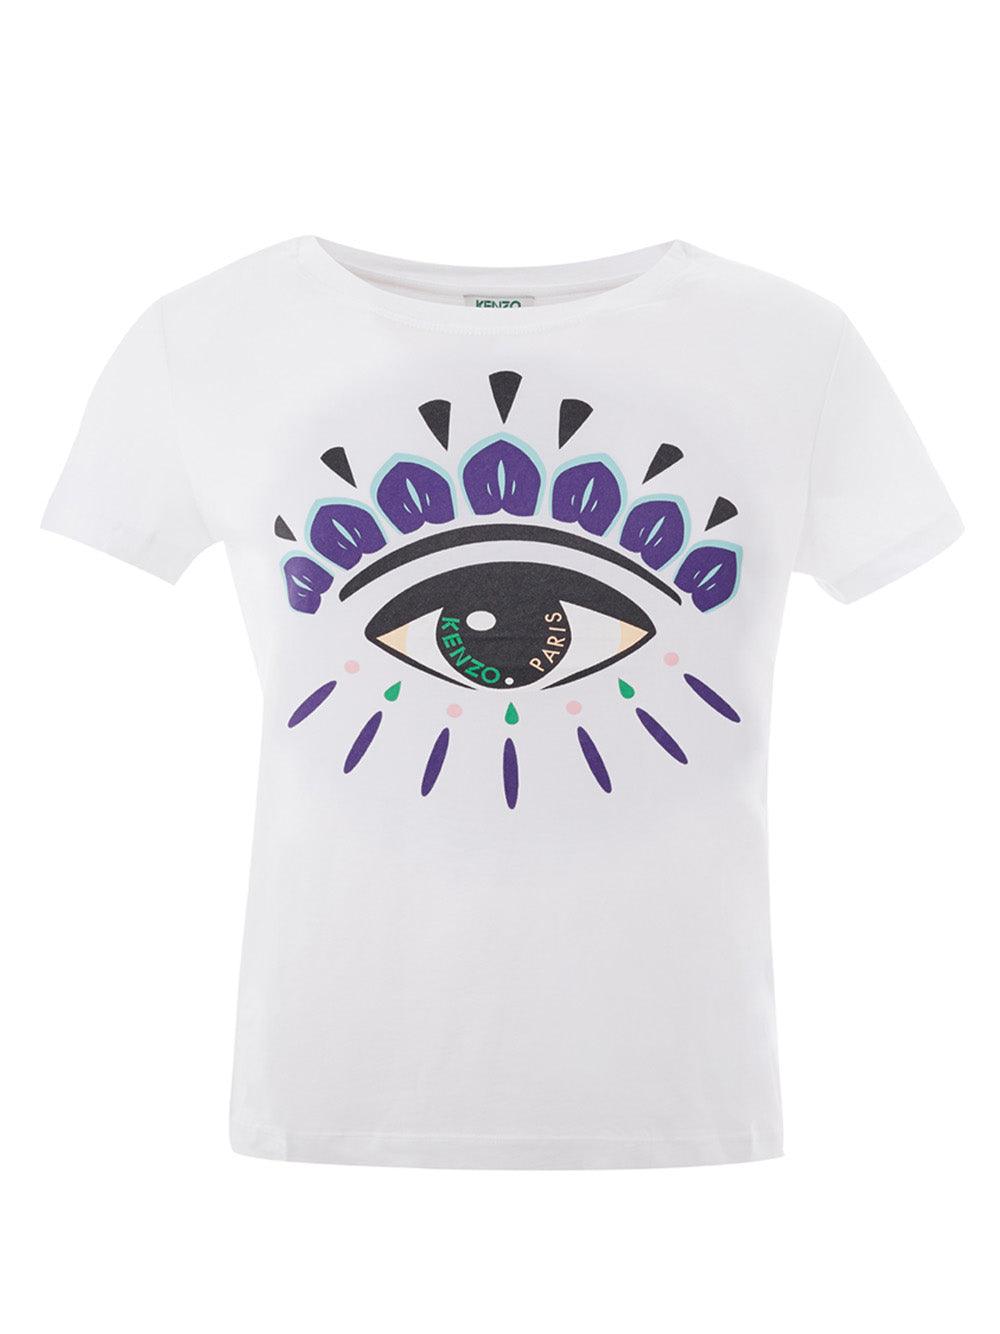 Kenzo White Cotton T-Shirt with Eye Contrasting Print - Ellie Belle